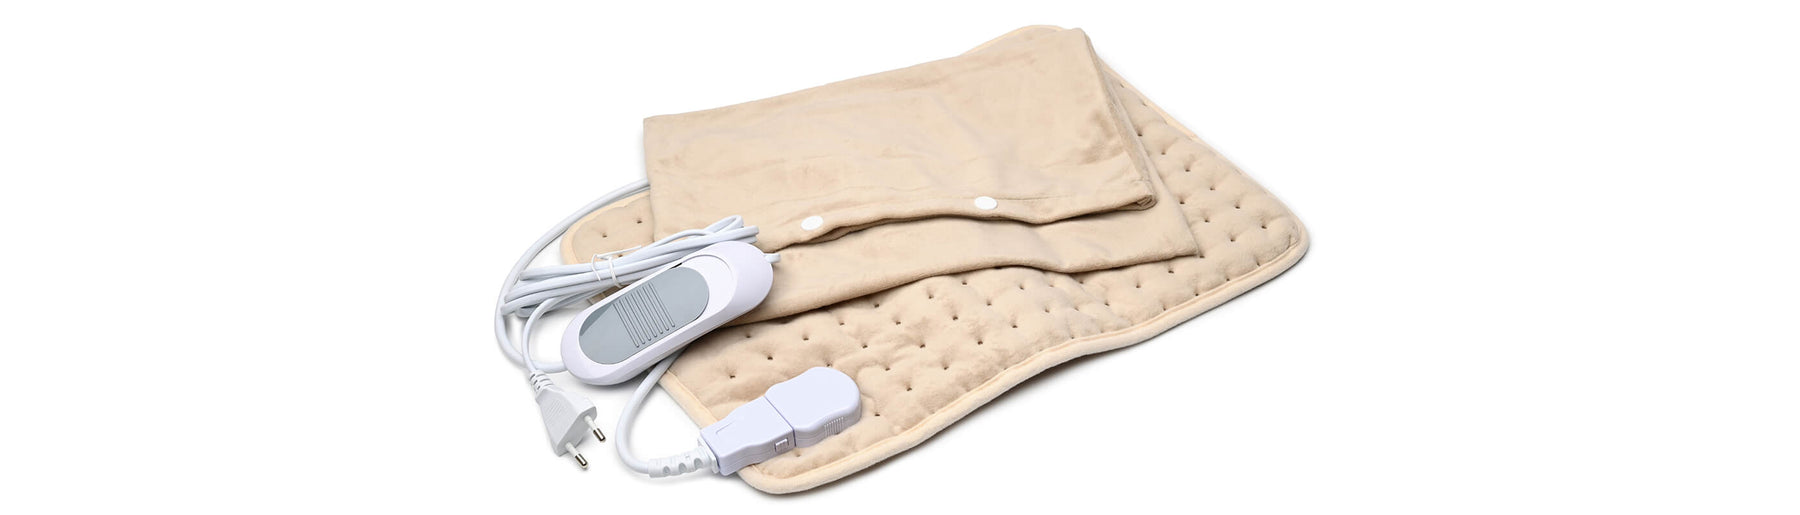 The benefits of massage table warmers and heating pads